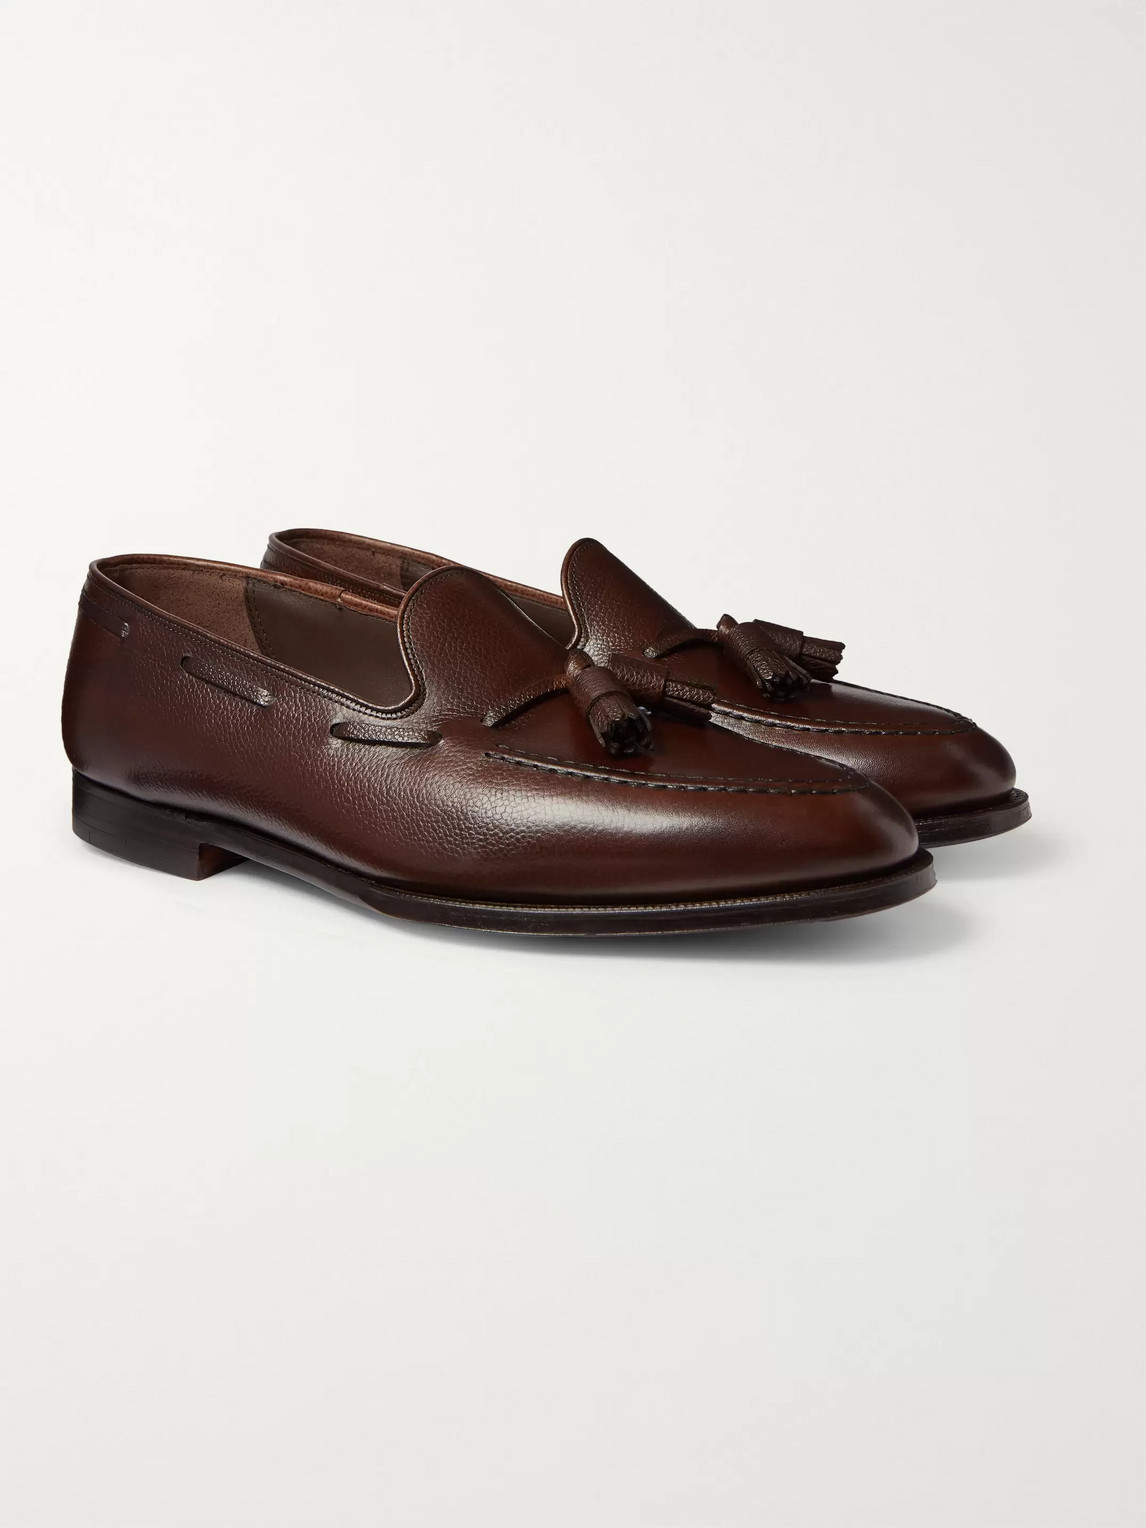 GEORGE CLEVERLEY ADRIAN LEATHER TASSELLED LOAFERS